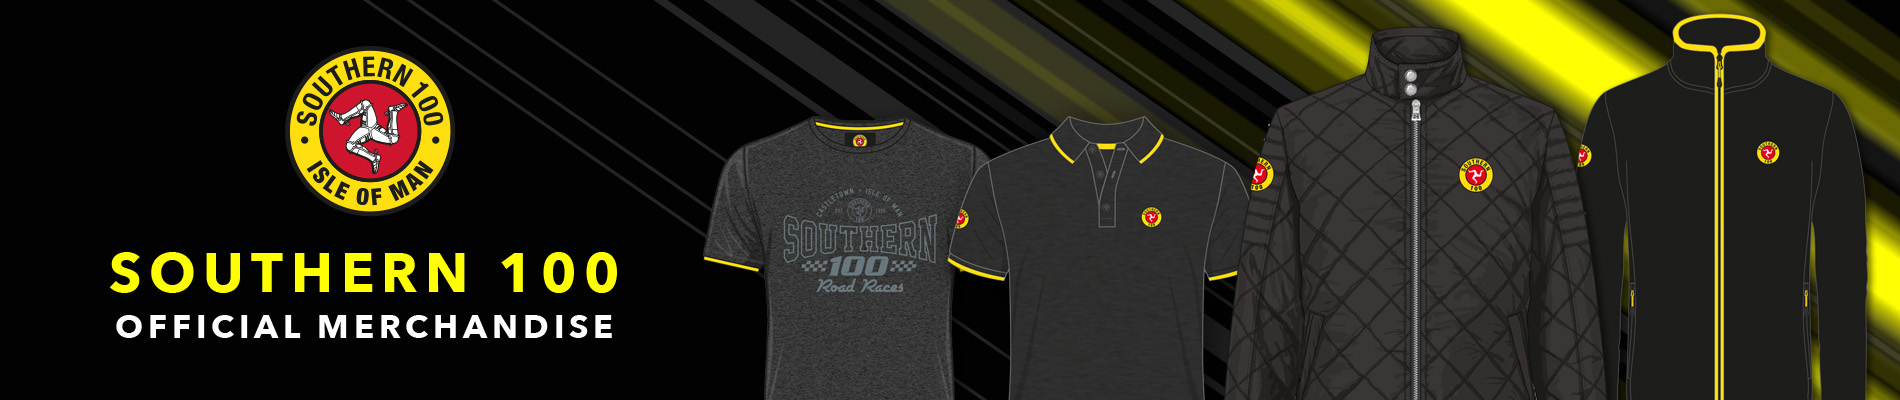 Proud Producers of Your Official Southern 100 Merchandise